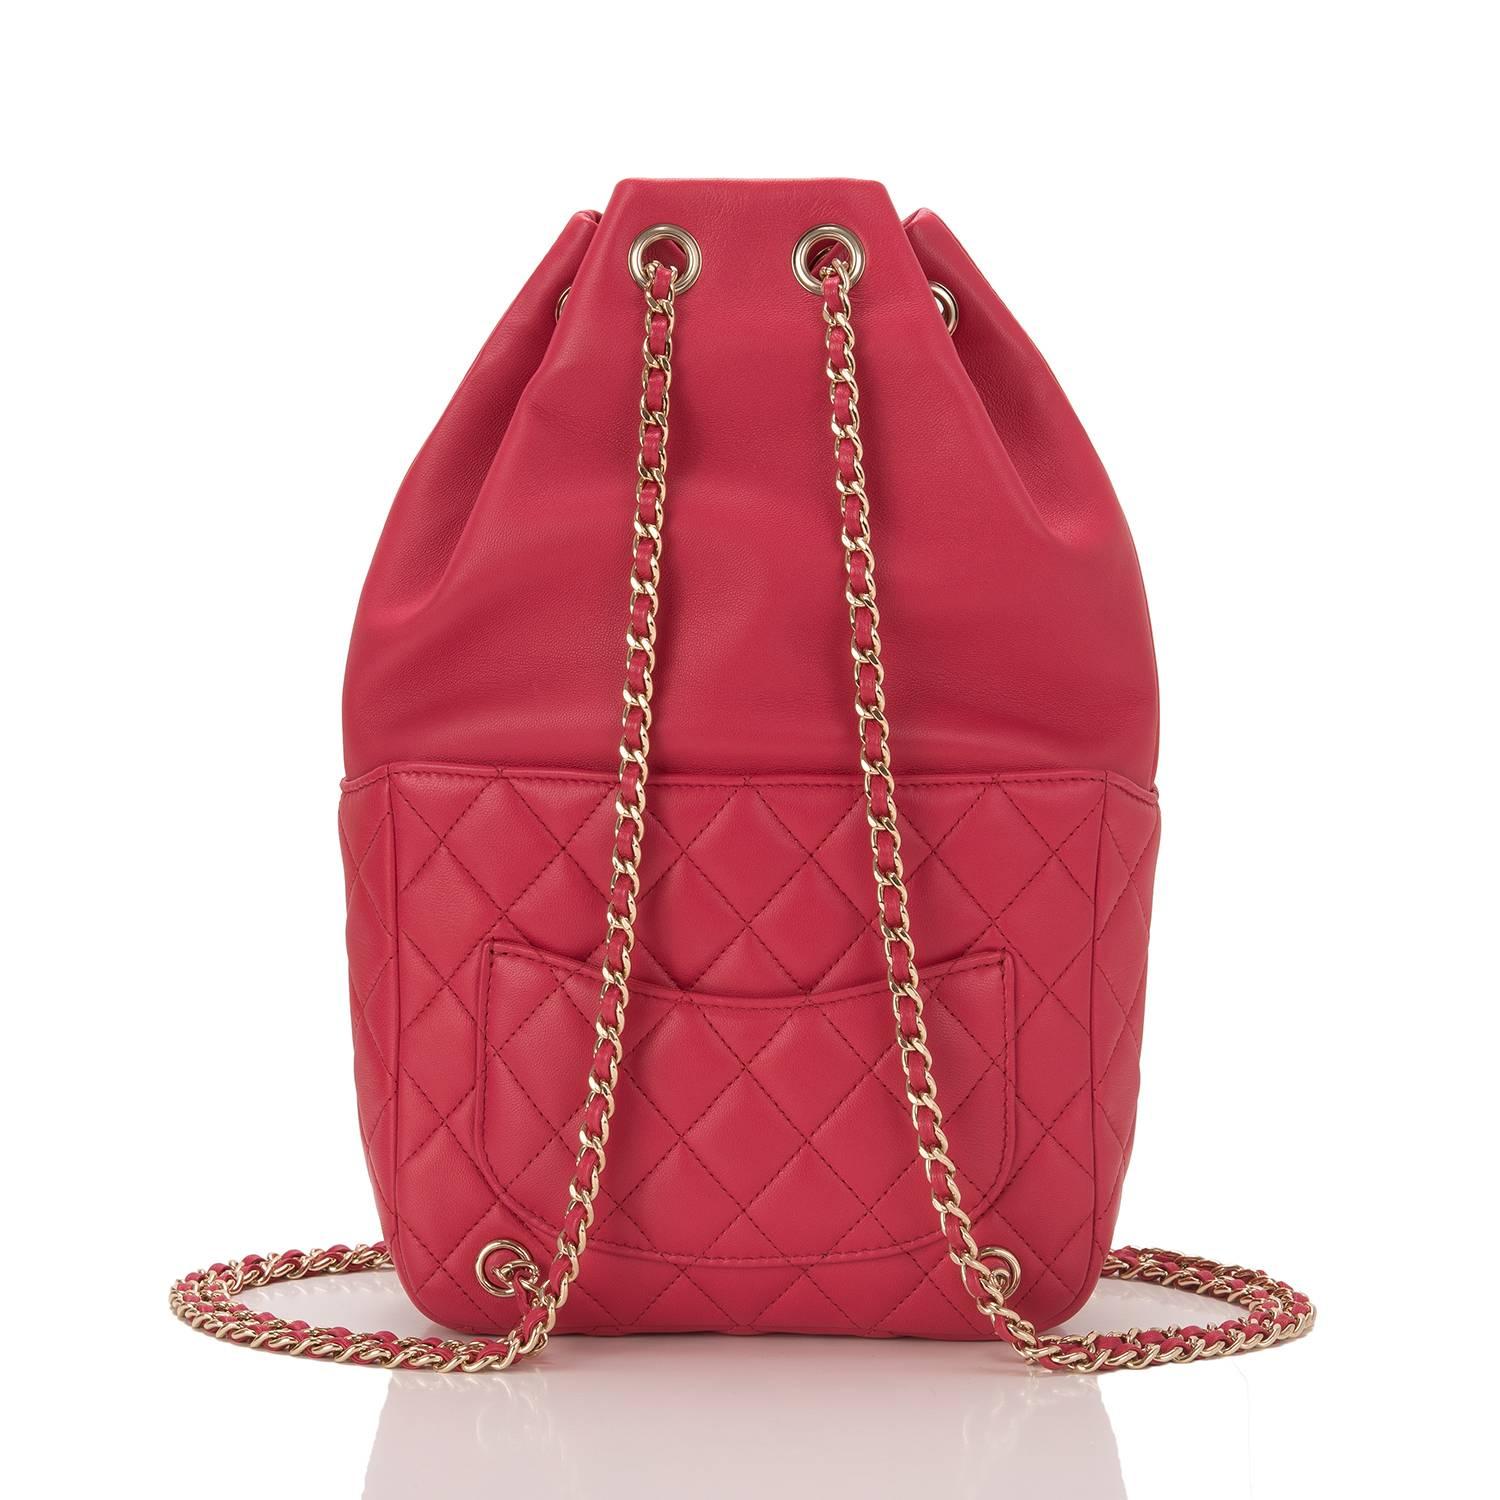 Chanel Red Lambskin Flap Backpack In Excellent Condition For Sale In New York, NY